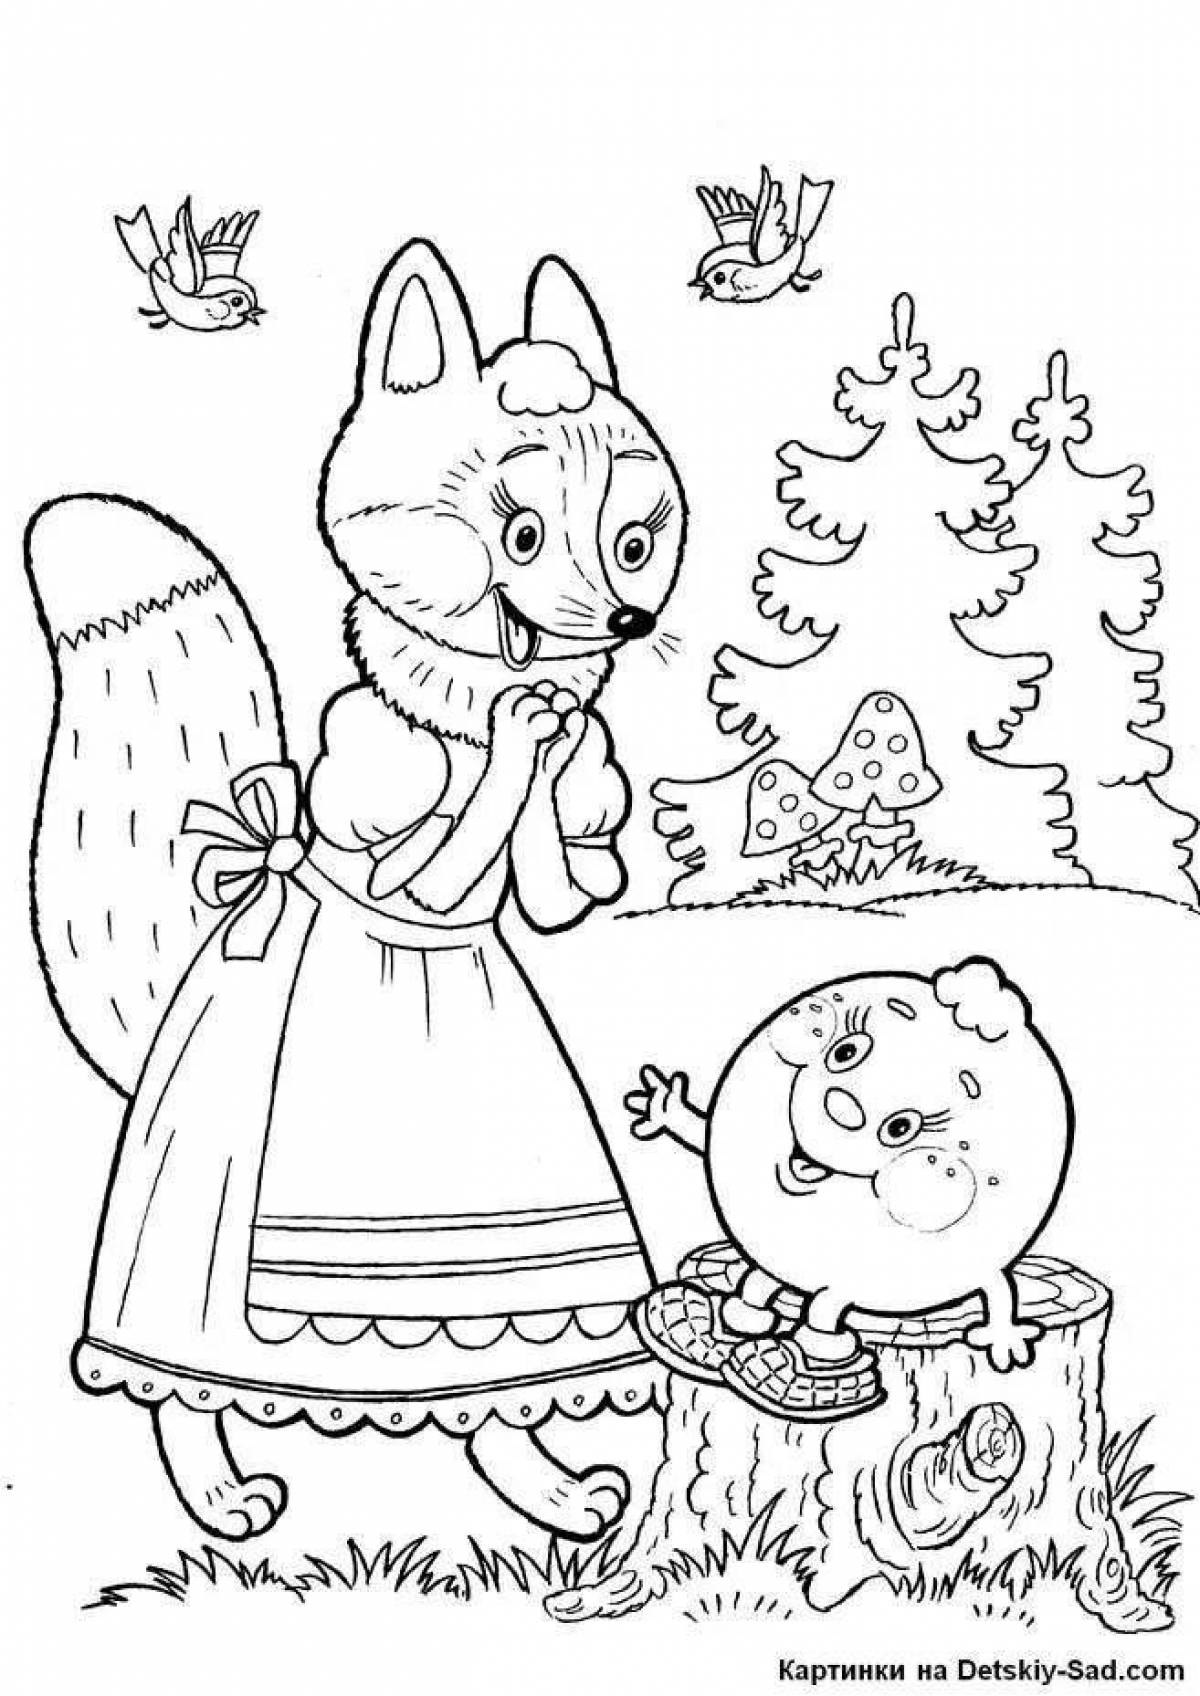 Wonderful coloring book heroes of fairy tales for children